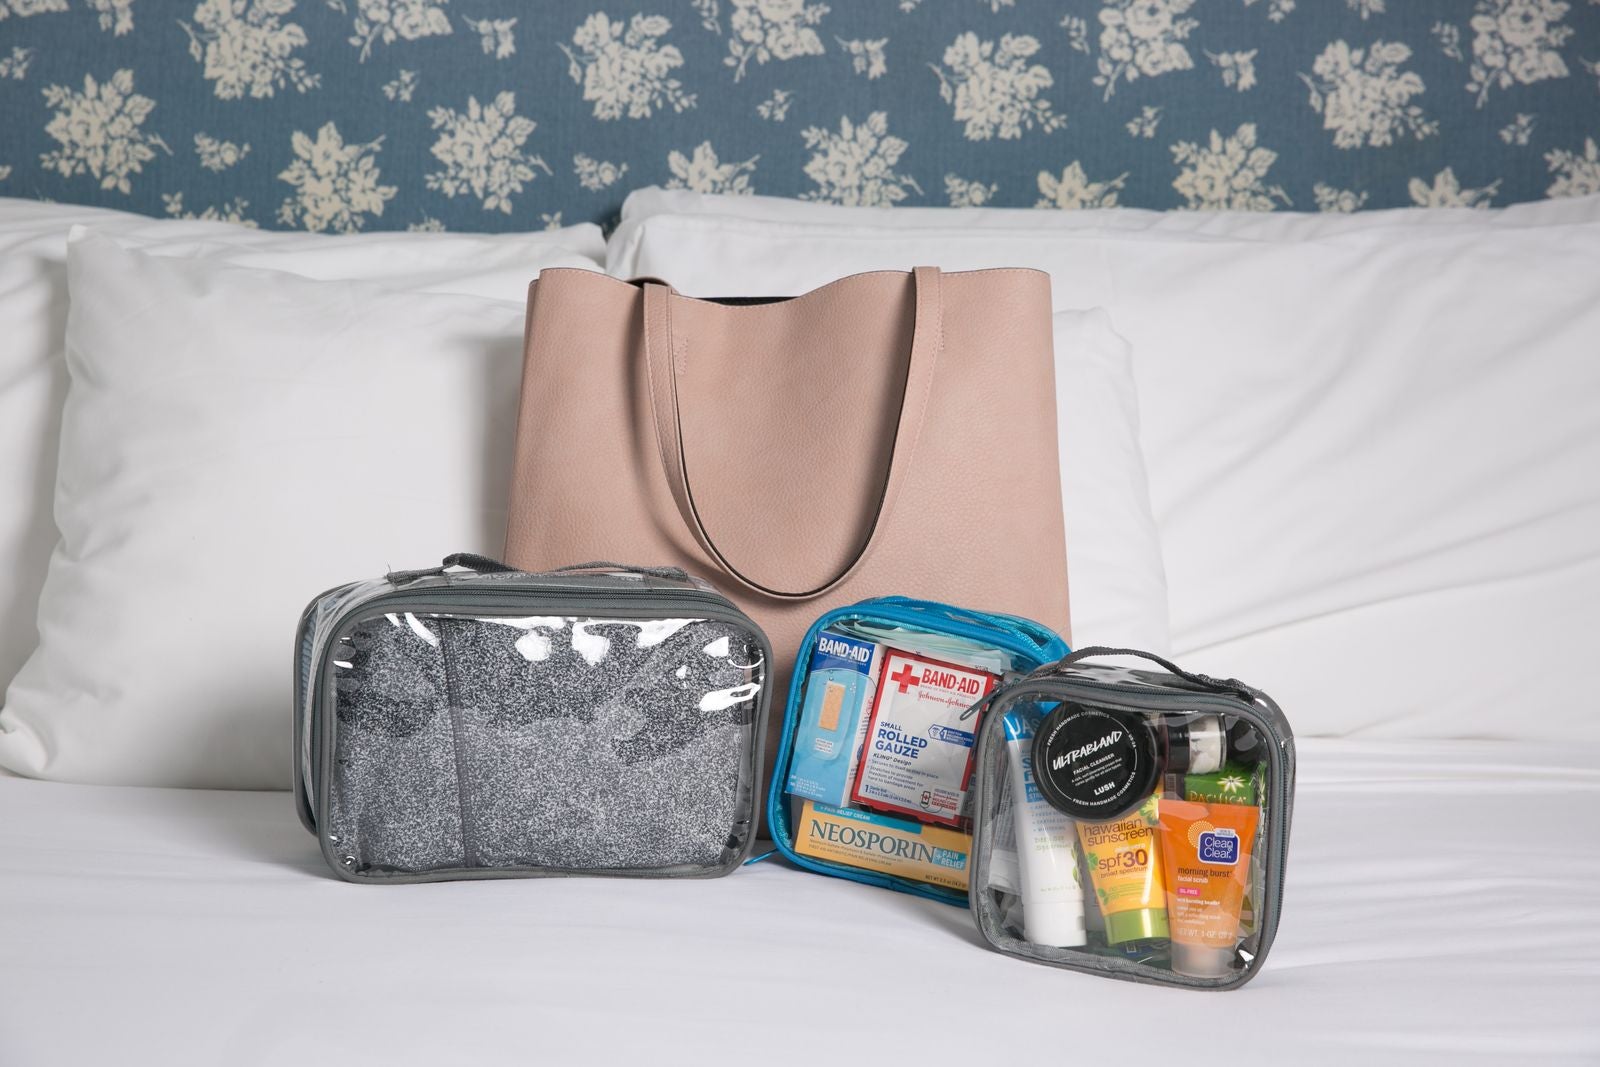 Tote bag and clear packing cubes on a bed